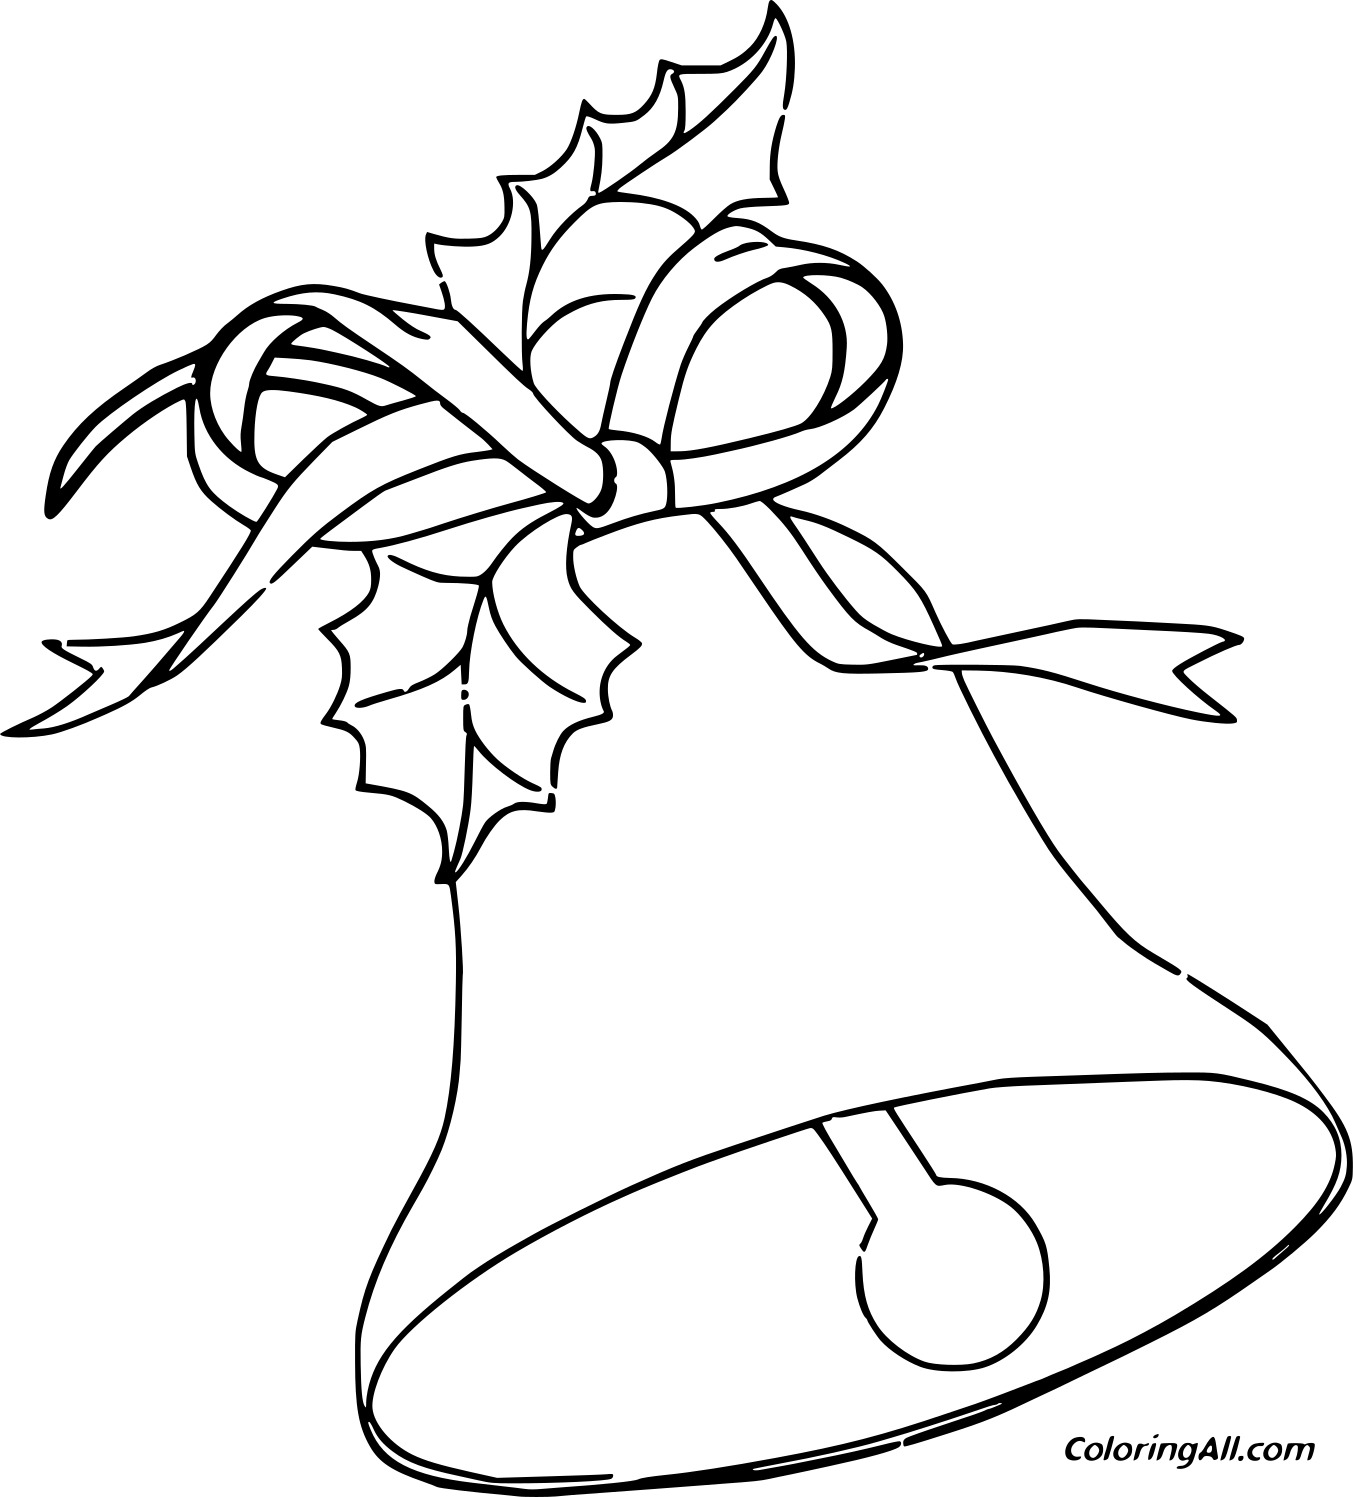 Simple Christmas Bell Image For Kids